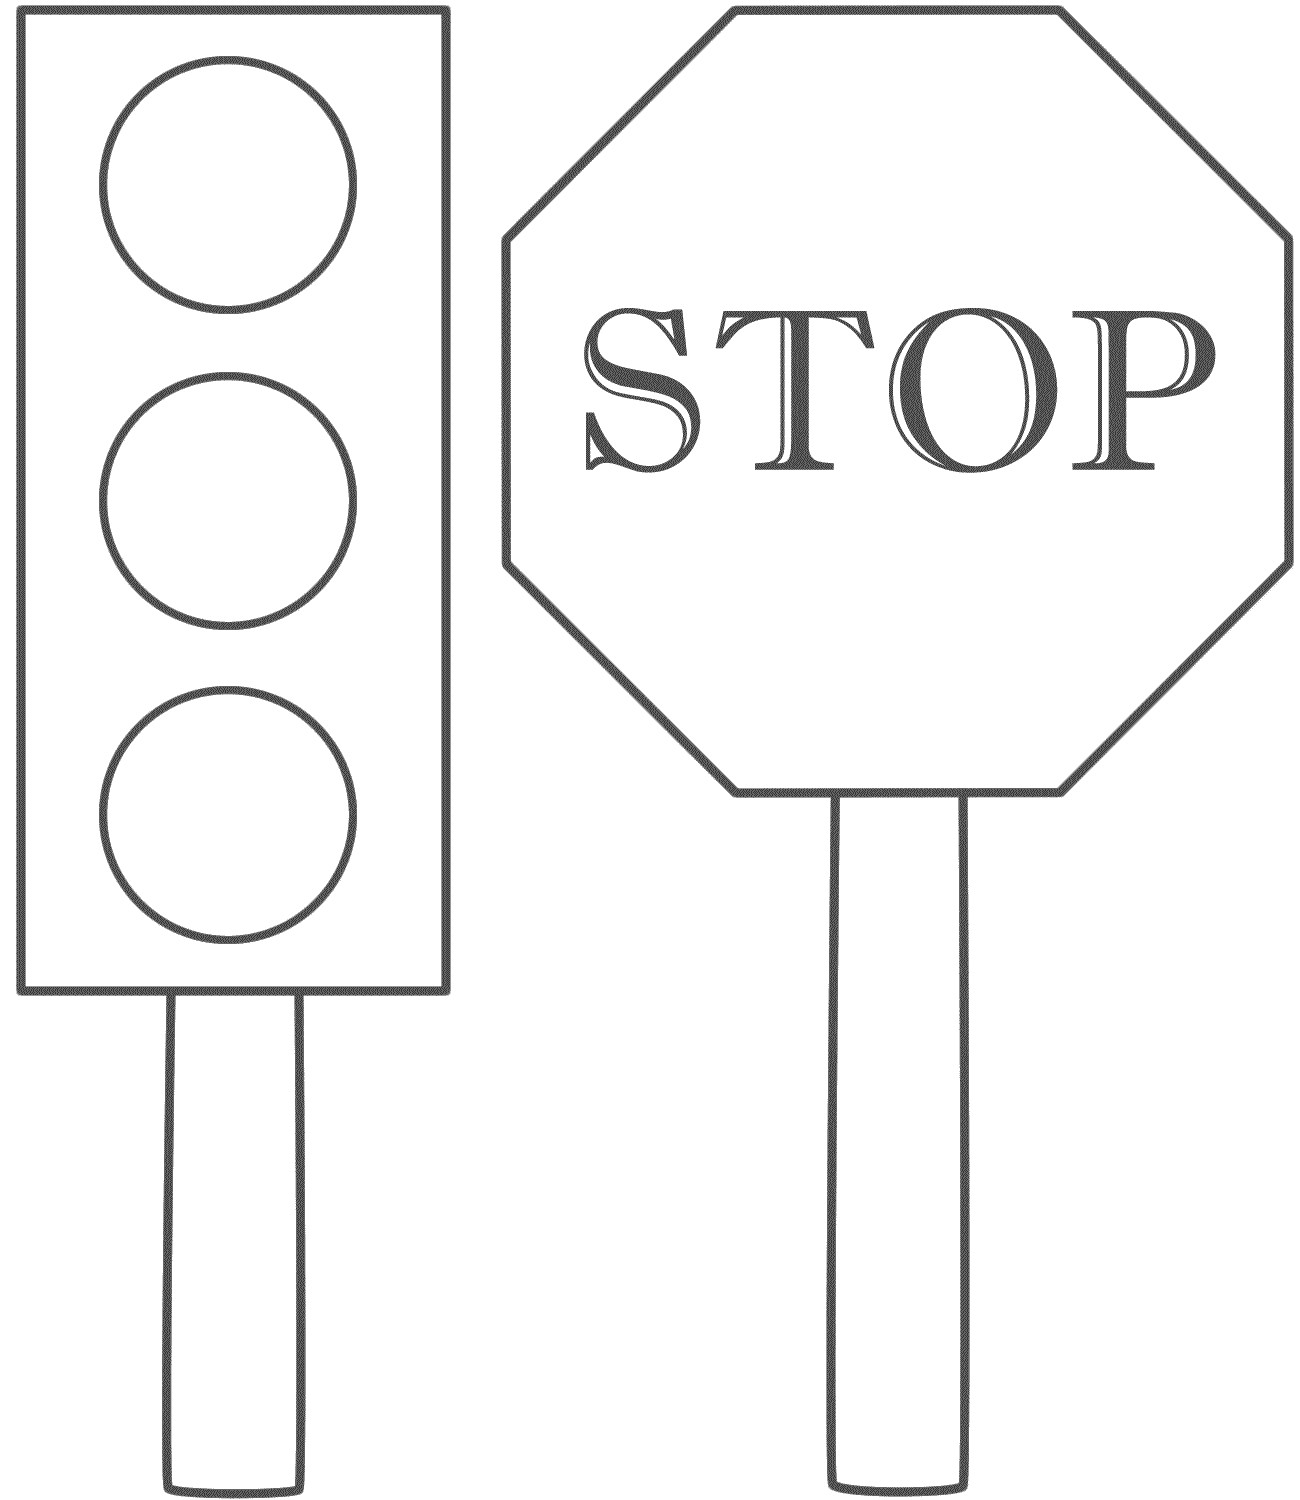 Traffic Light Template Cliparts.co